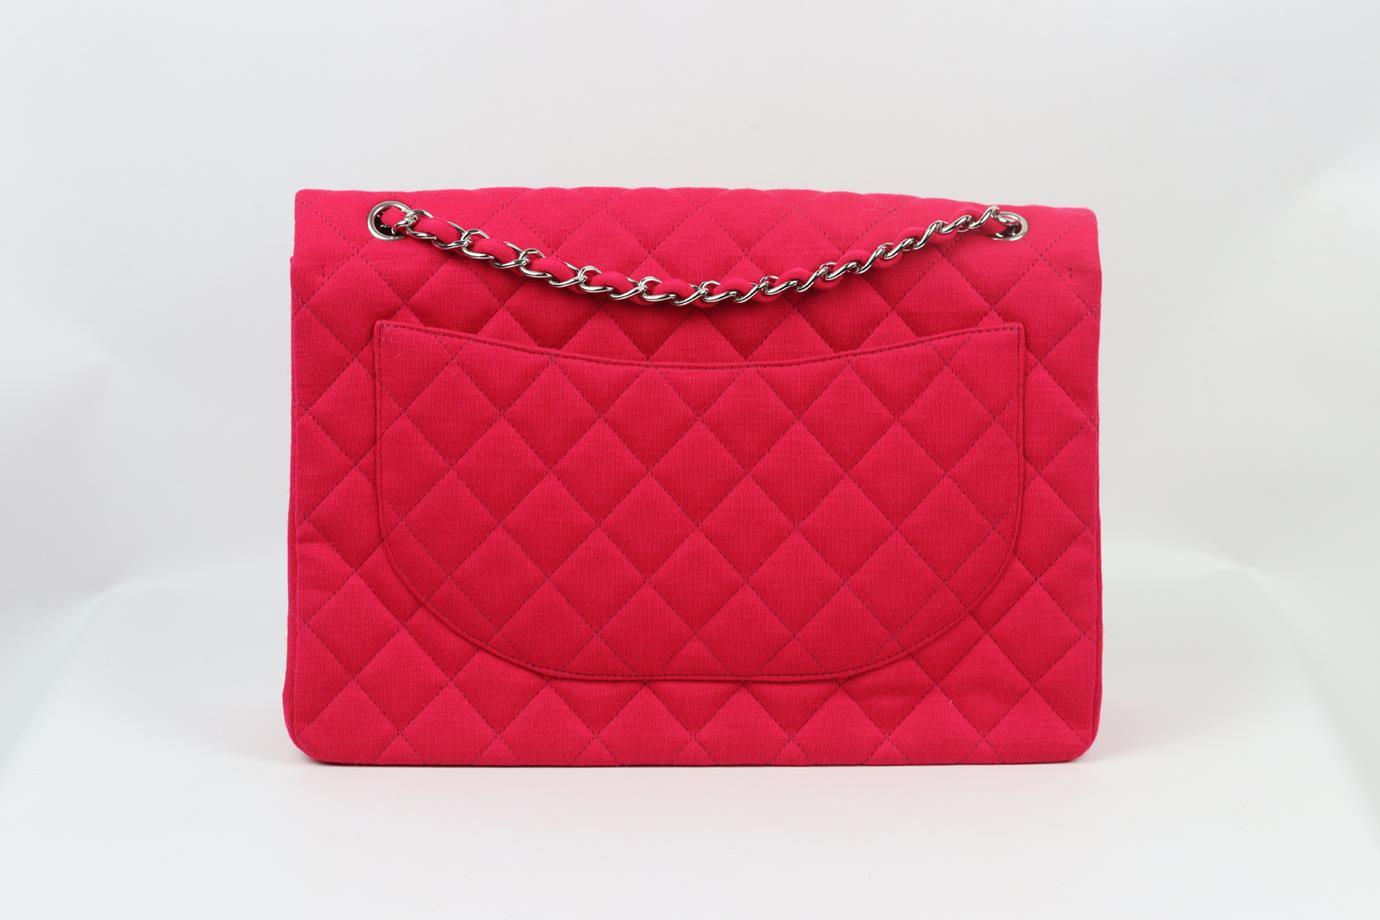 Chanel 2010 Maxi Classic Quilted Jersey Single Flap Shoulder Bag In Excellent Condition For Sale In London, GB